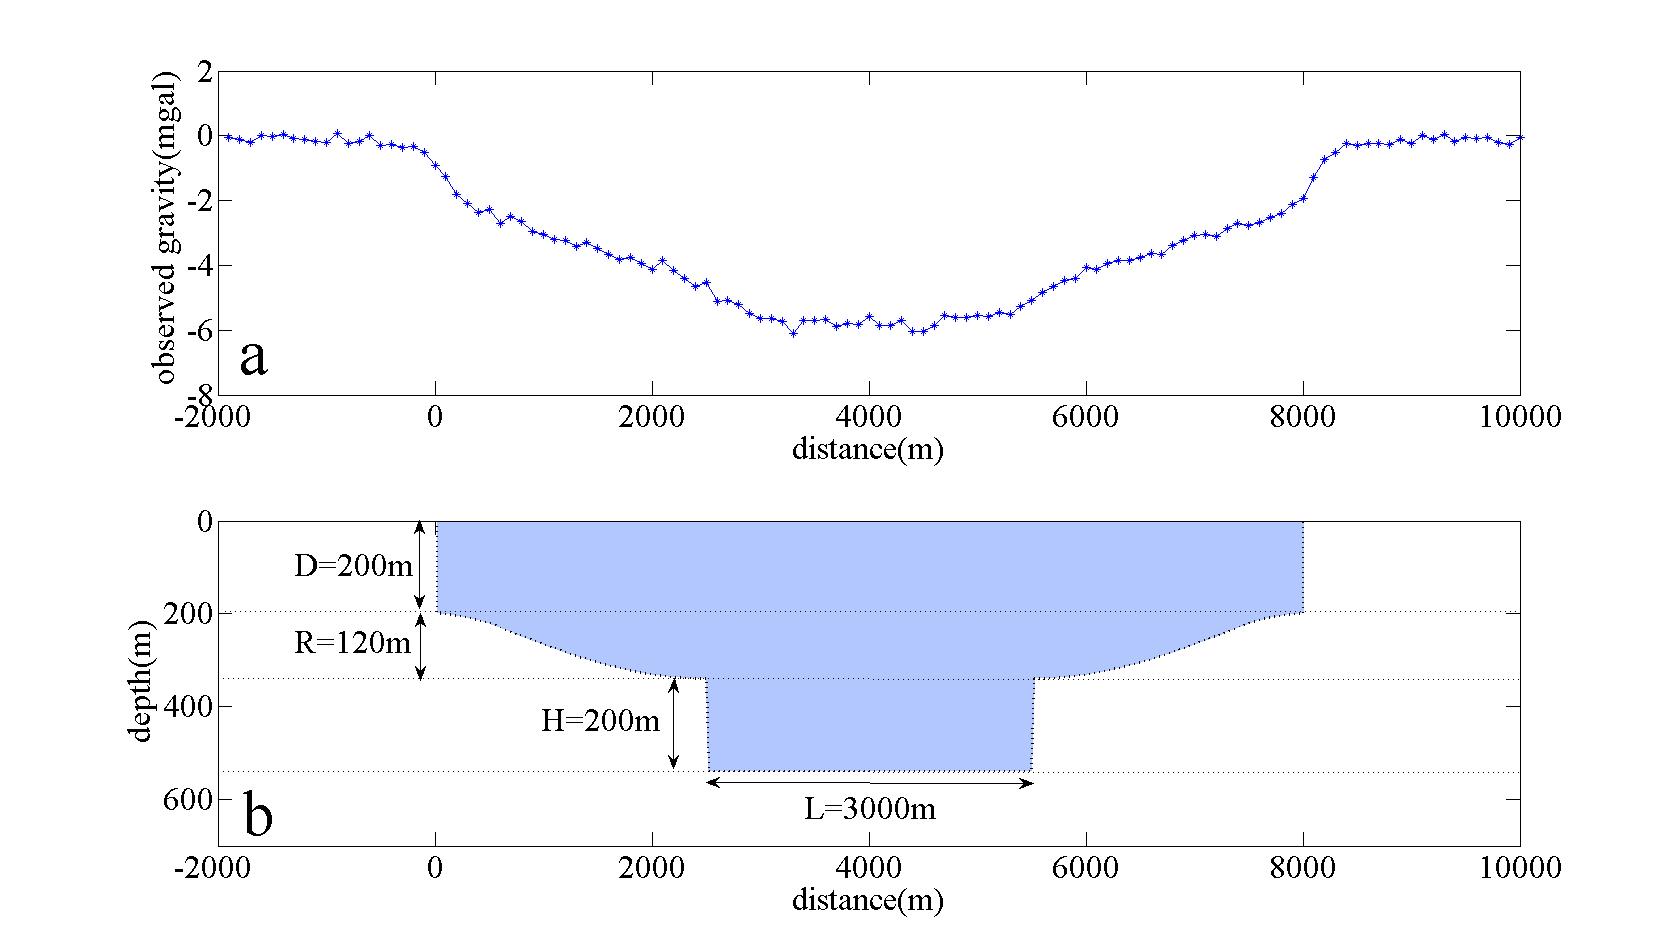 Fig 1_1 shows the synthetic faulted basement model and the simulated noisy gravity data.